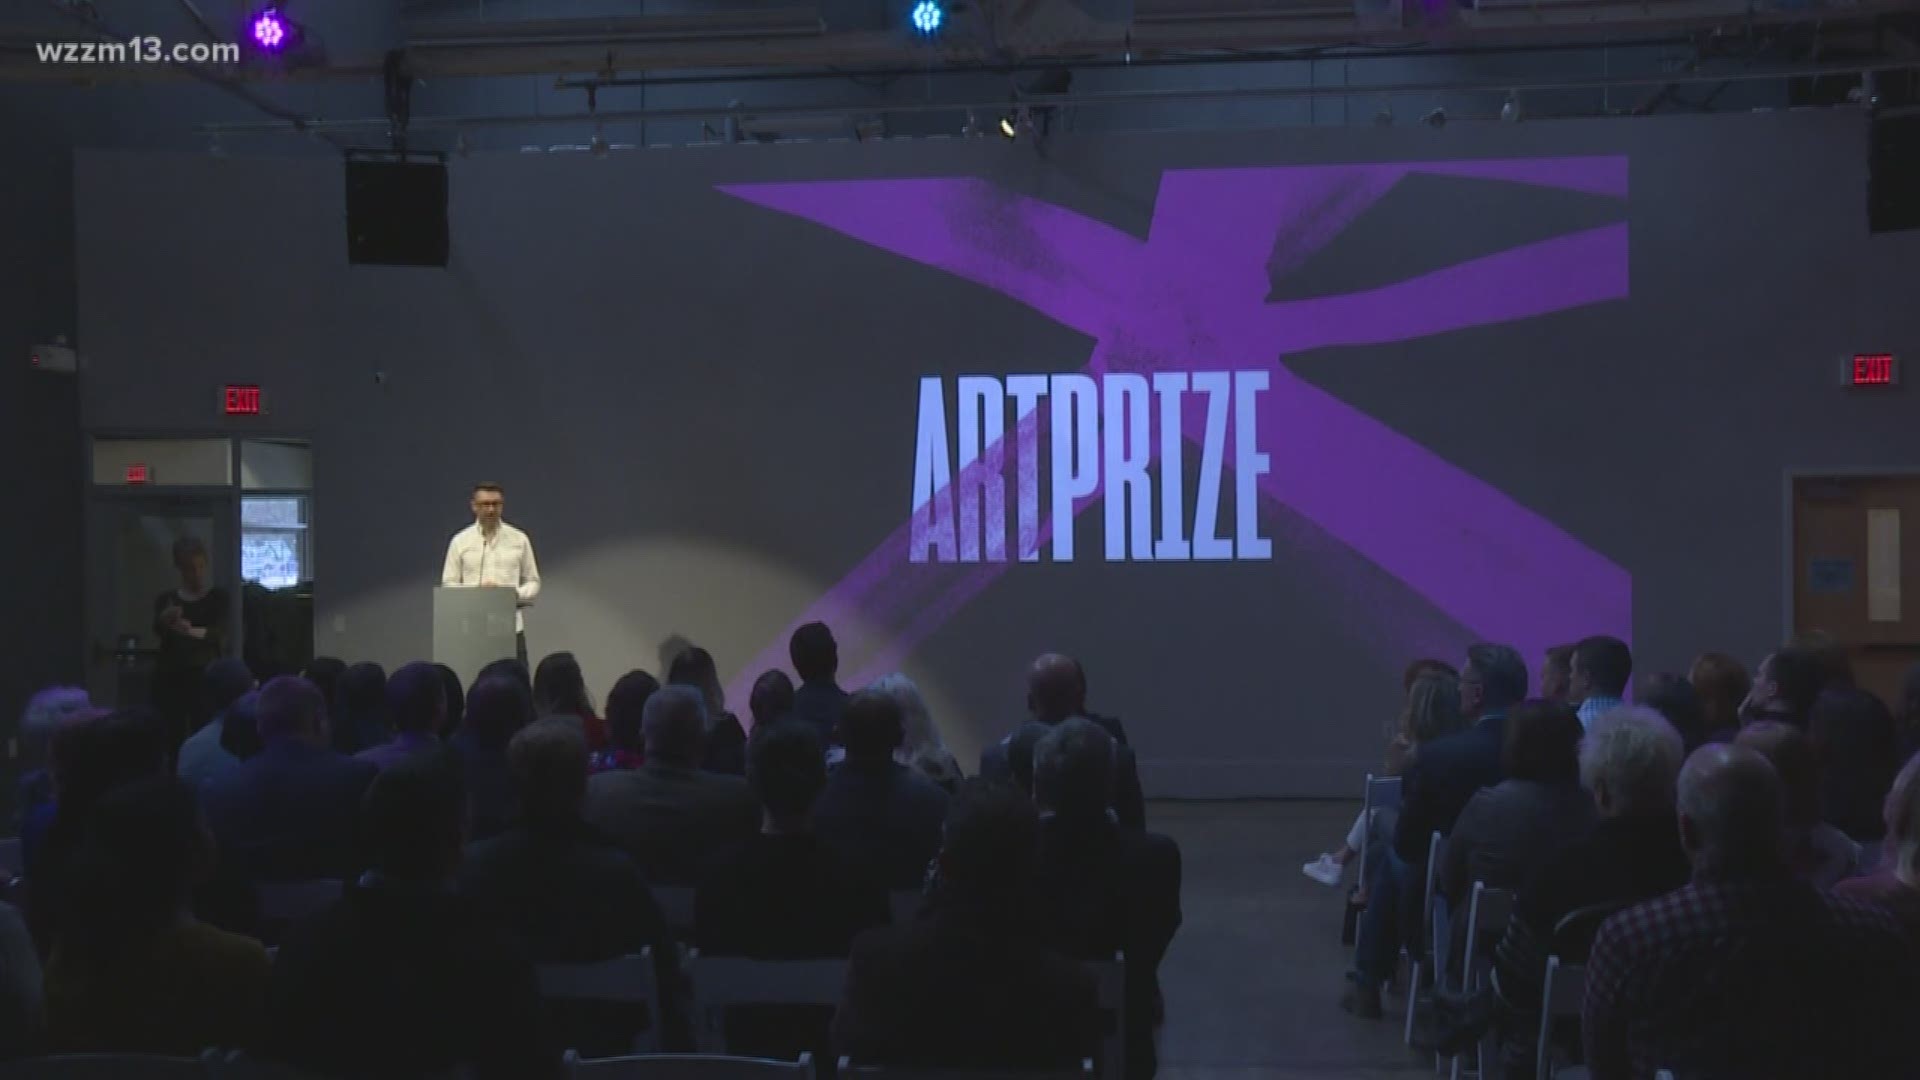 ArtPrize 10 hosts preview events